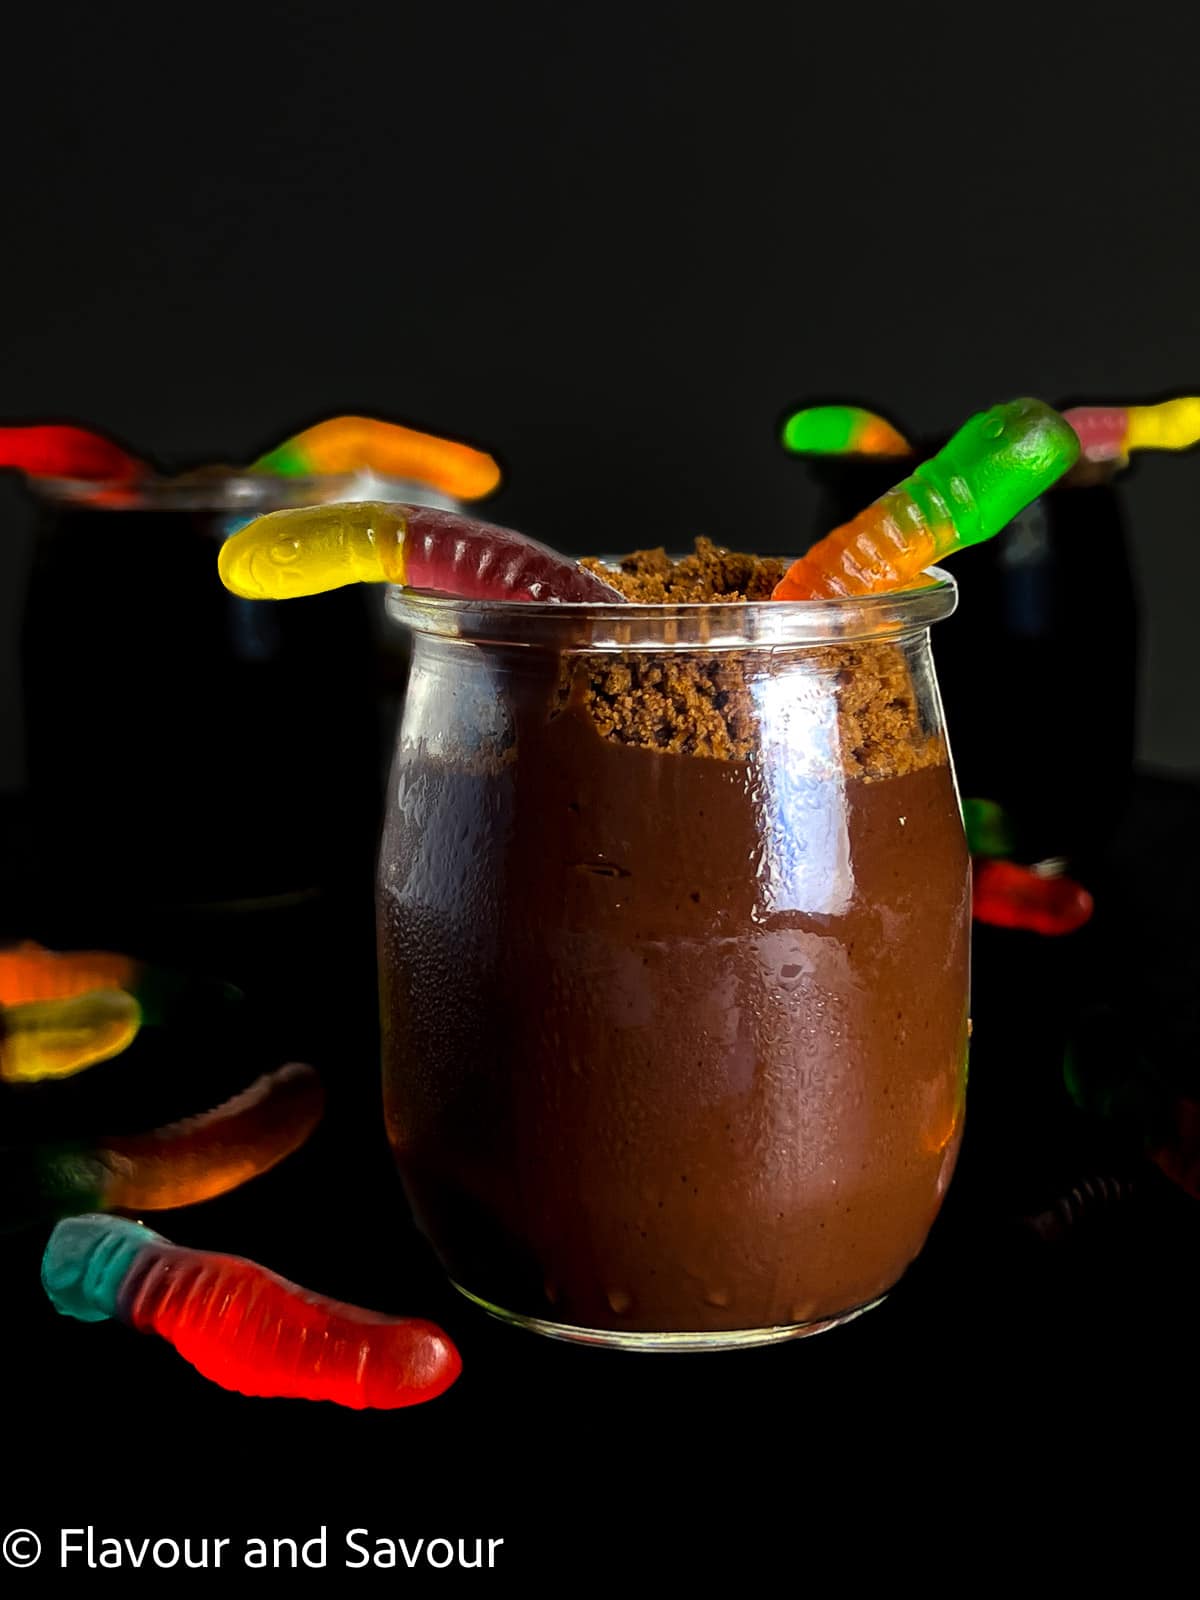 A small dessert glass with chocolate pudding, chocolate cookie crumbs and colourful gummy worms.